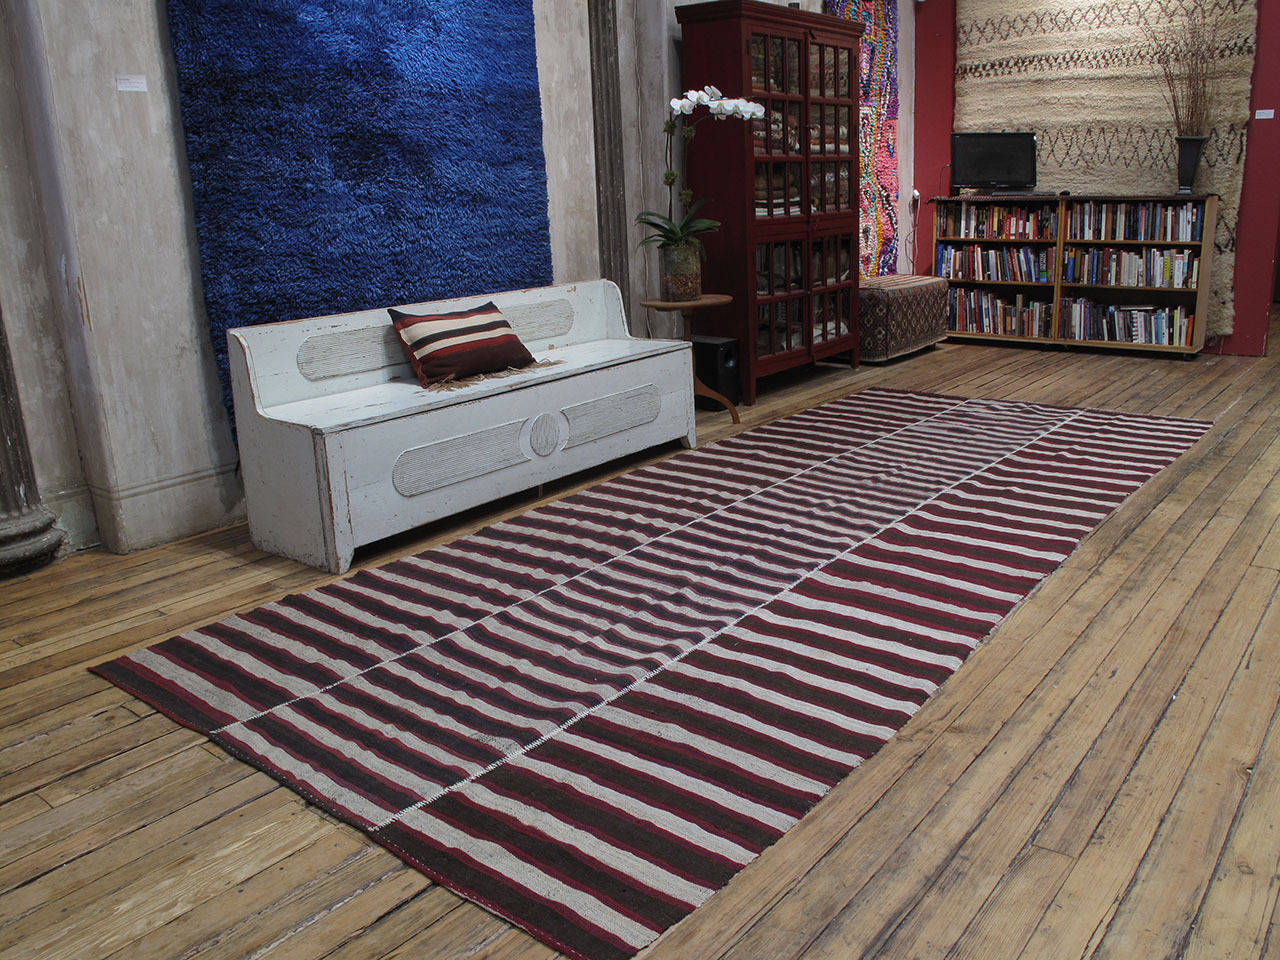 A large tribal flat-weave from Northern Iran, woven in three narrow panels with a simple design of alternating bands. The use of red and blue, in addition to the typical dark brown and ivory color palette is unusual. An authentic old weaving with